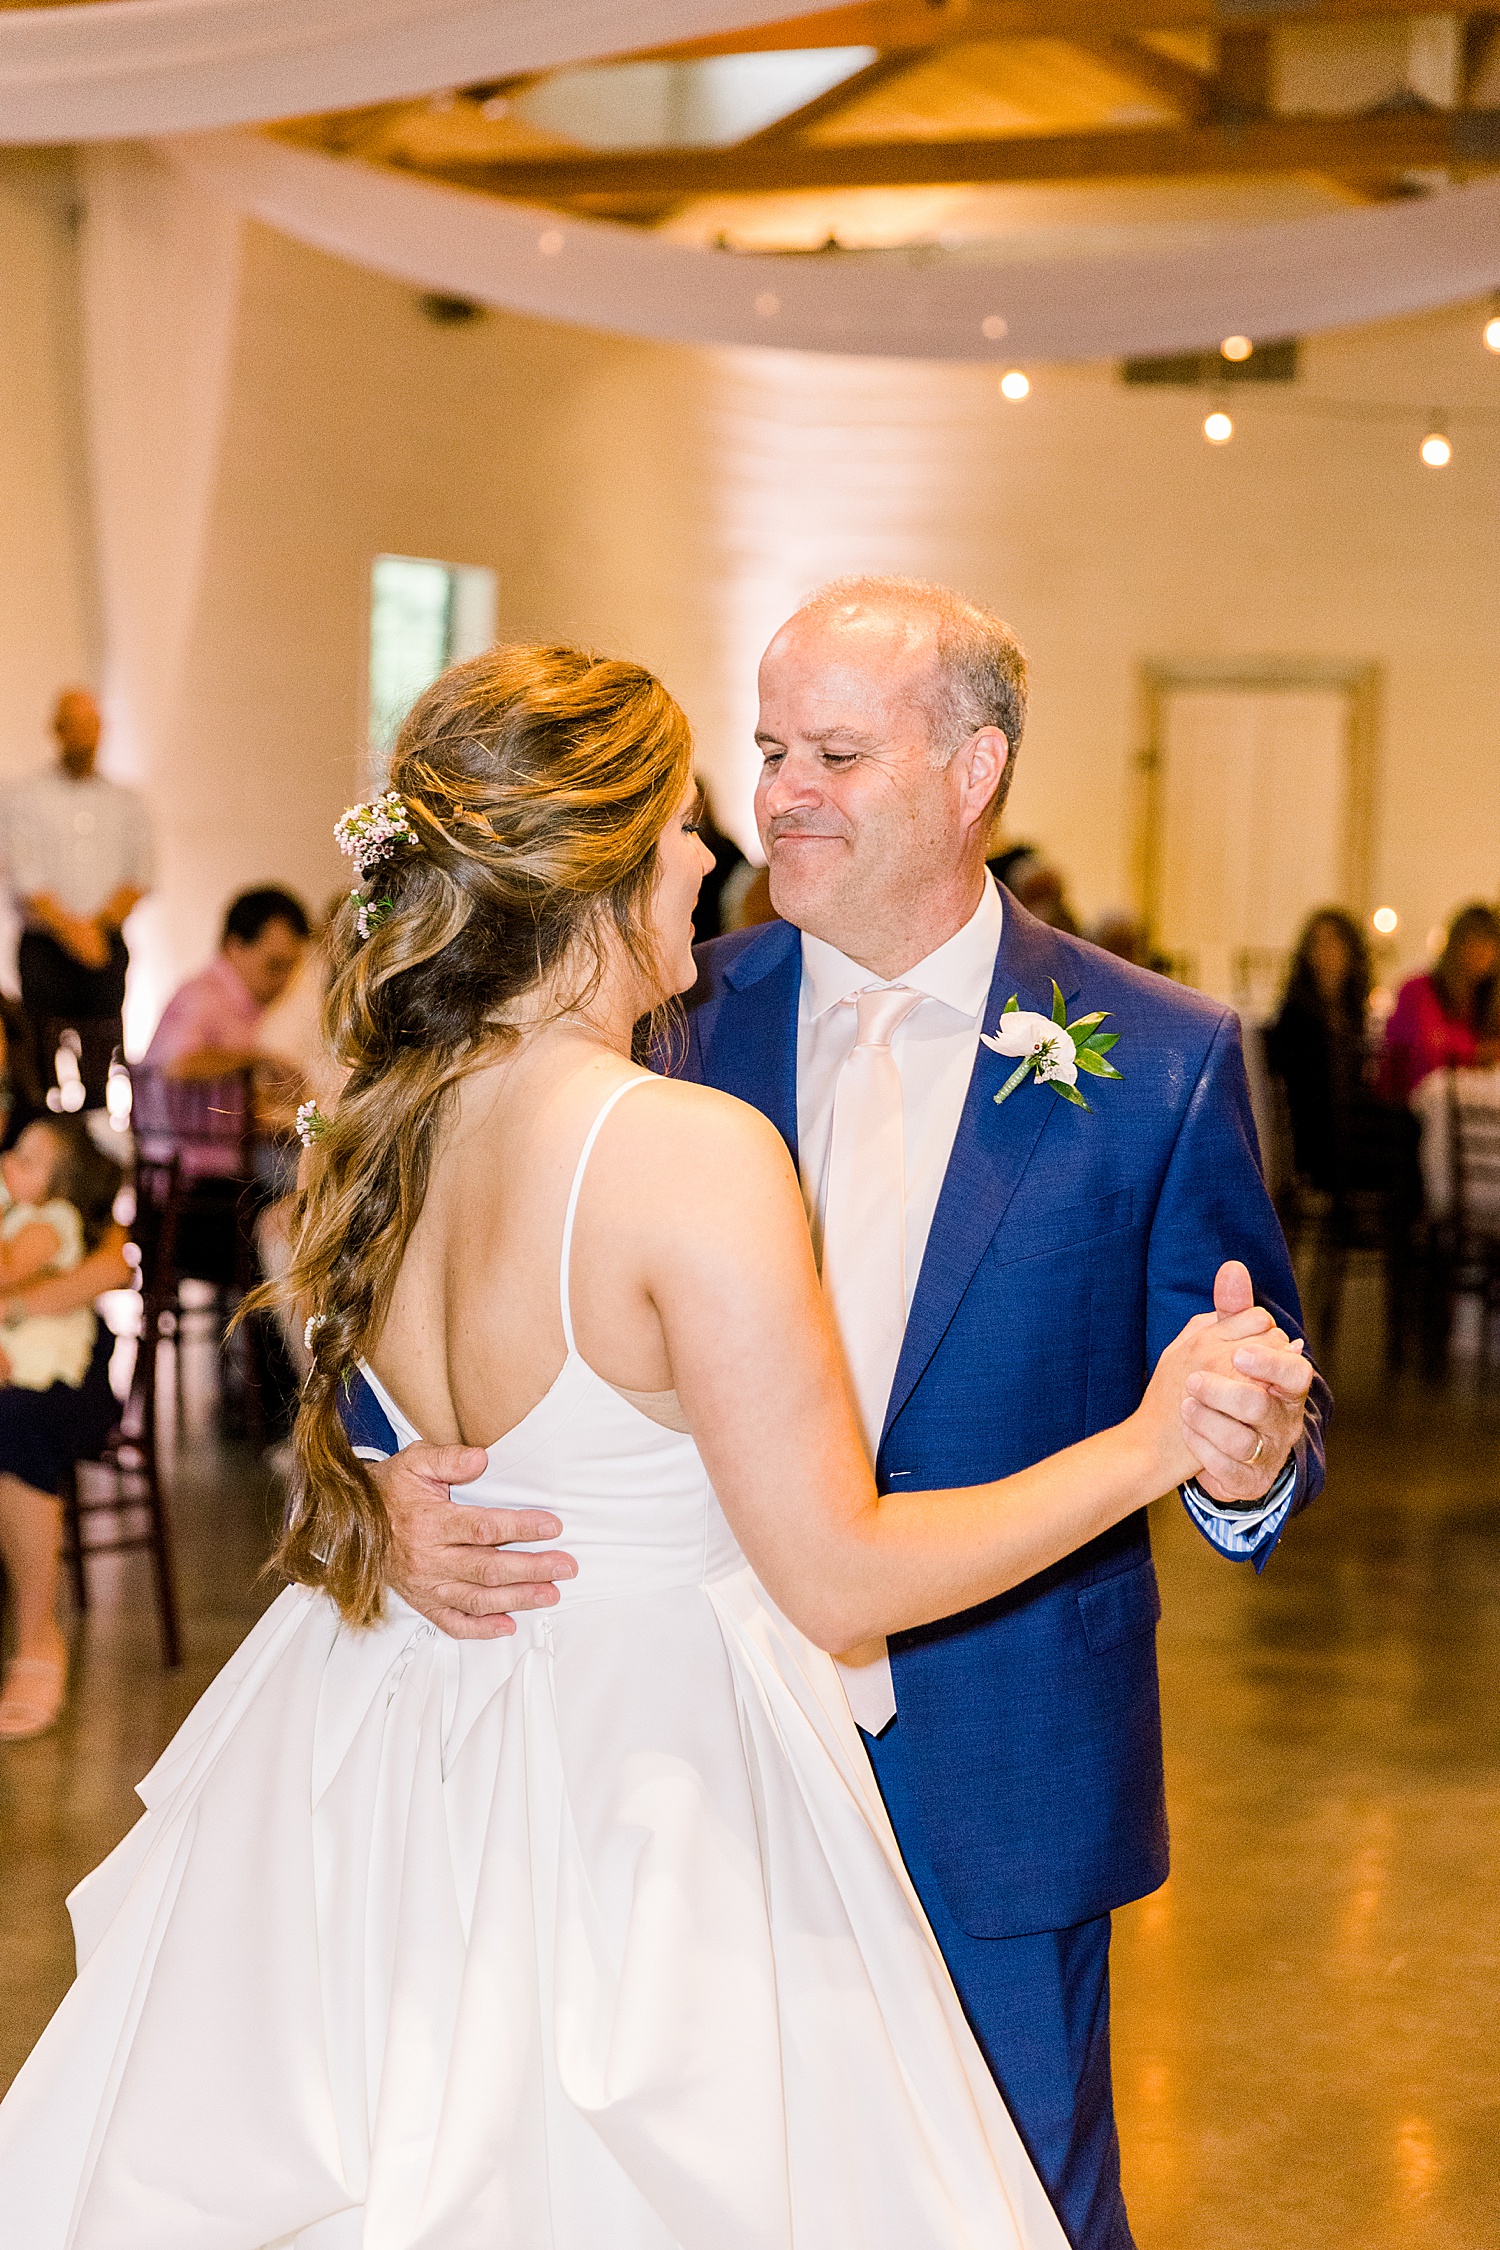 Bride and father during father-daughter dance together during wedding reception